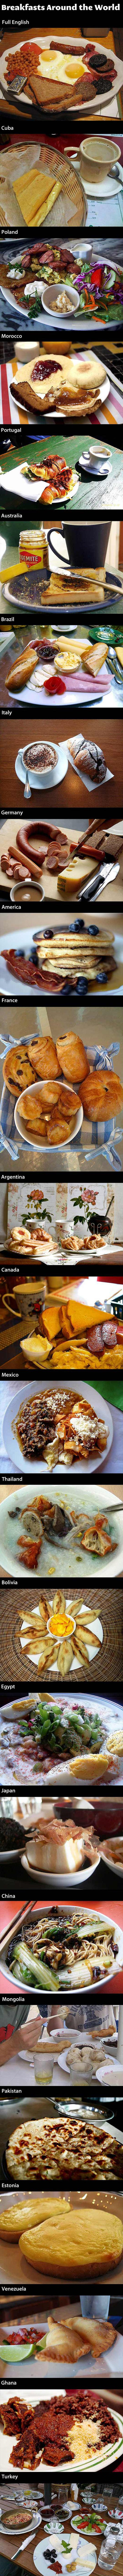 How To Eat Breakfast Around The World